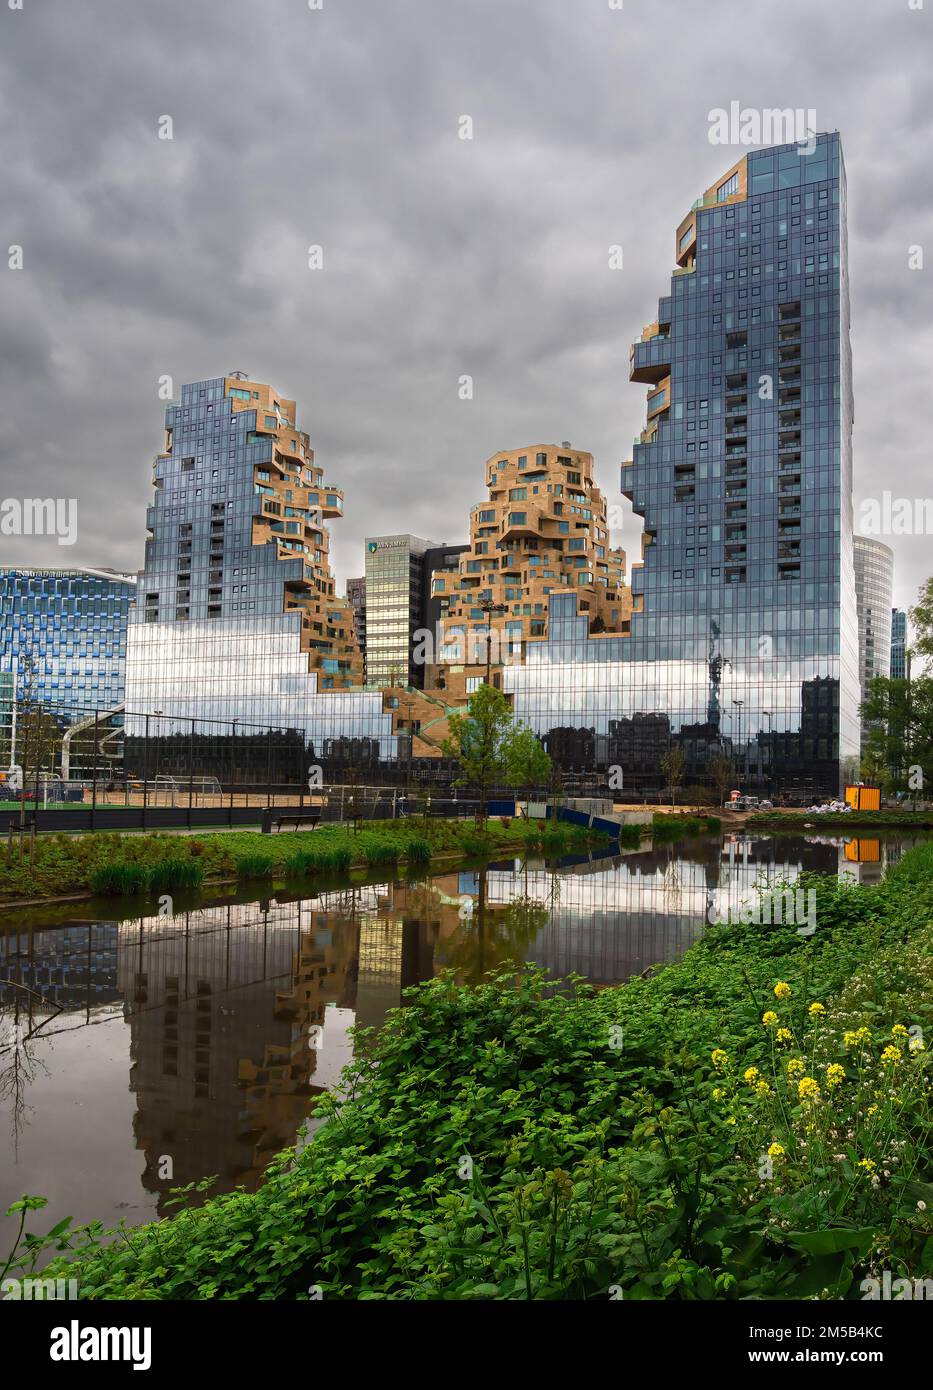 Amsterdam, Netherlands - April 27, 2022: Modern futuristic architecture called The valley in the Zuidas business district in Amsterdam. Stock Photo